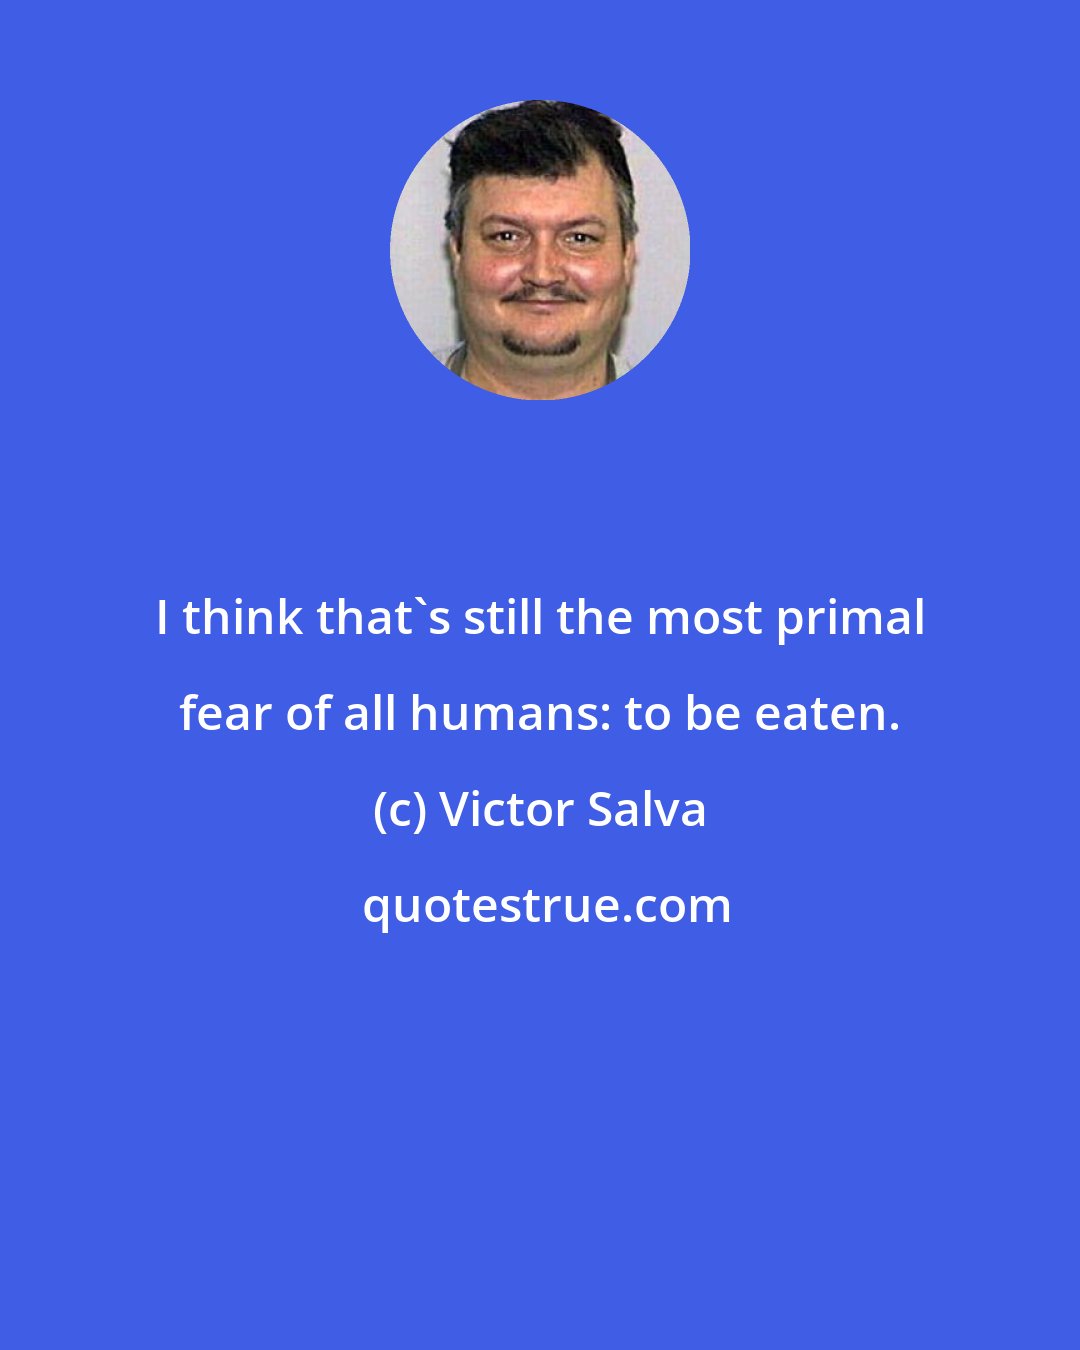 Victor Salva: I think that's still the most primal fear of all humans: to be eaten.